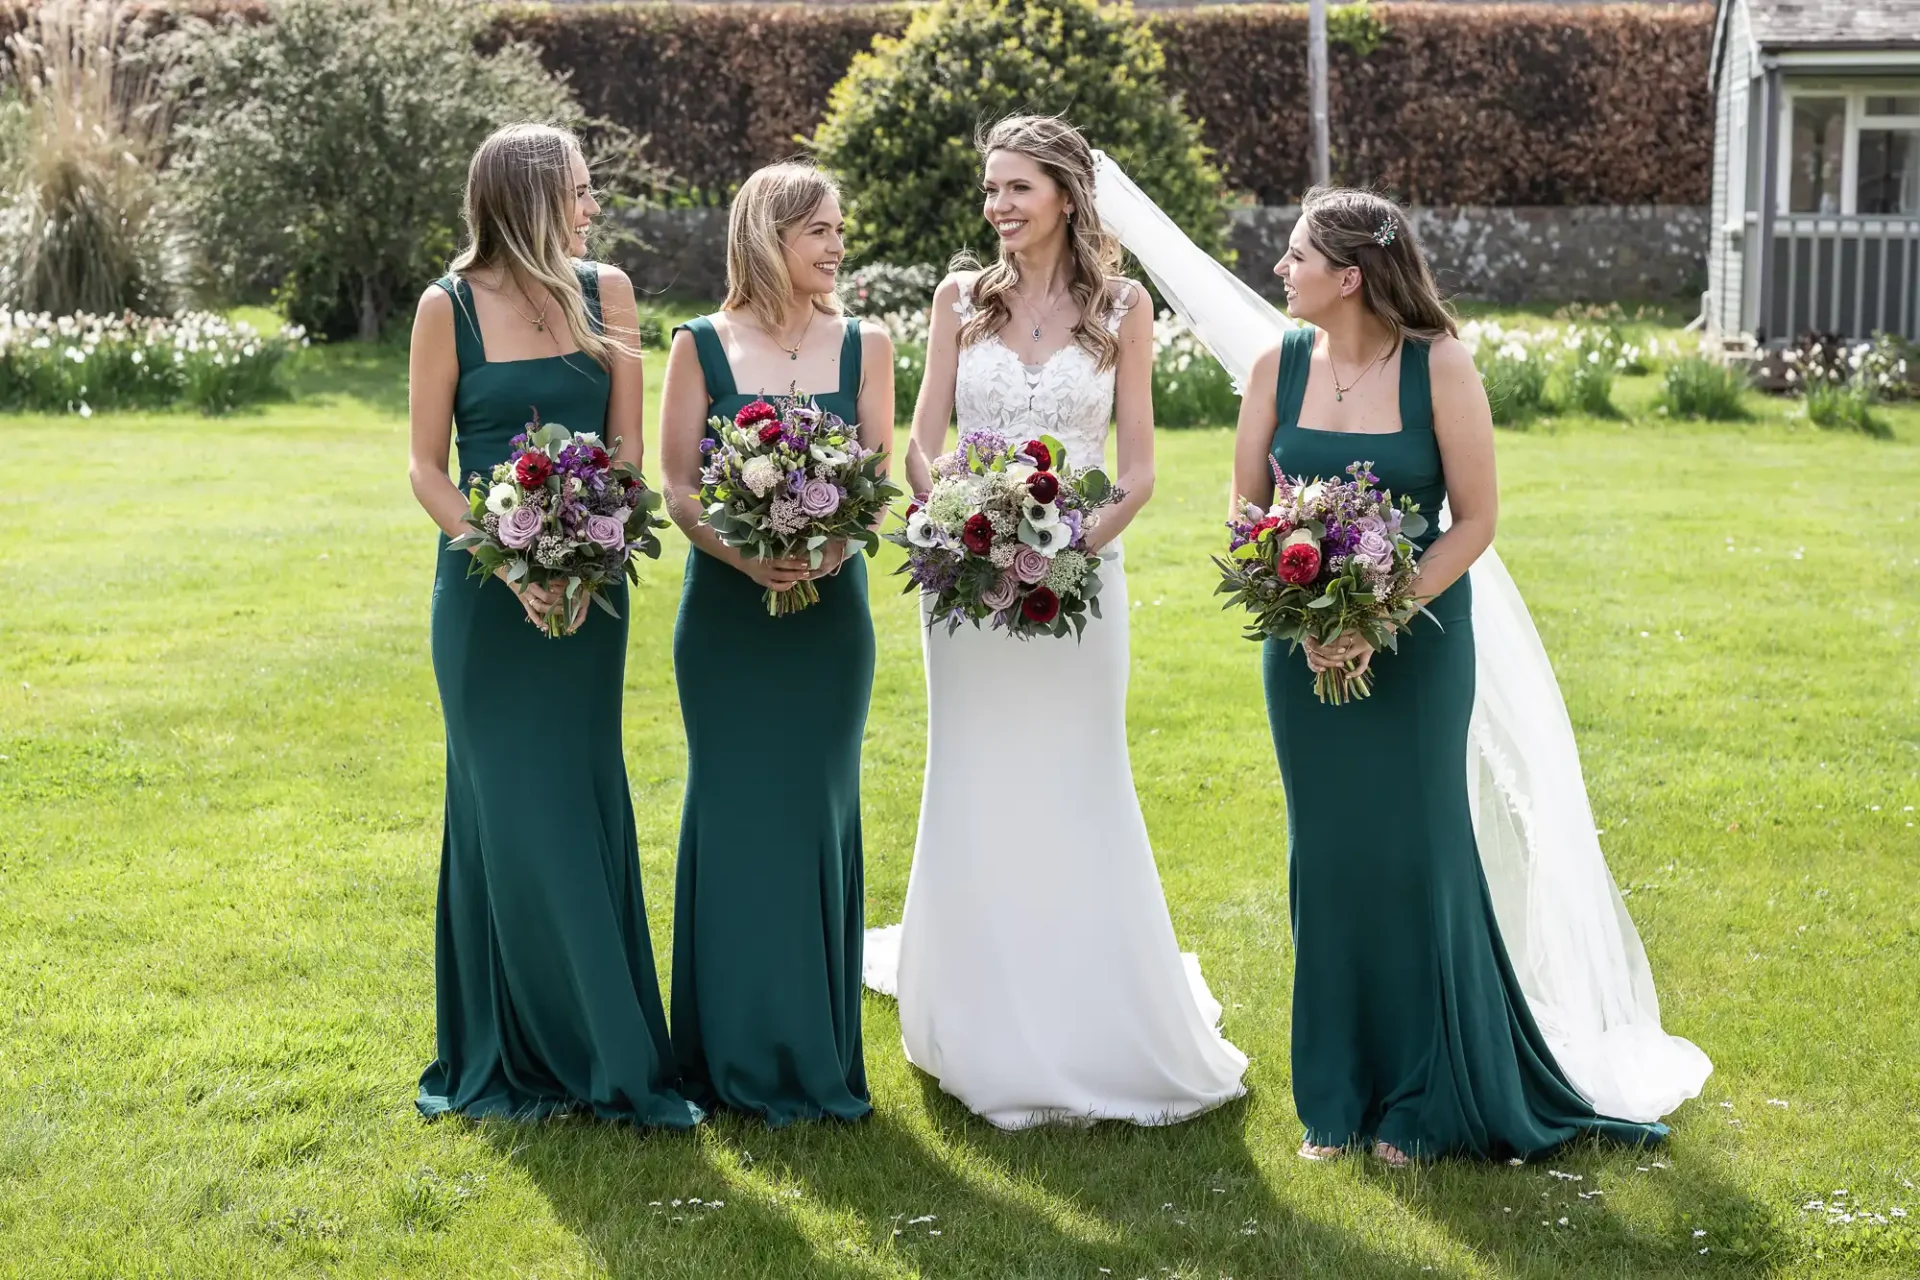 A bride in a white dress stands outside on grass with three bridesmaids in matching green dresses, all holding bouquets.